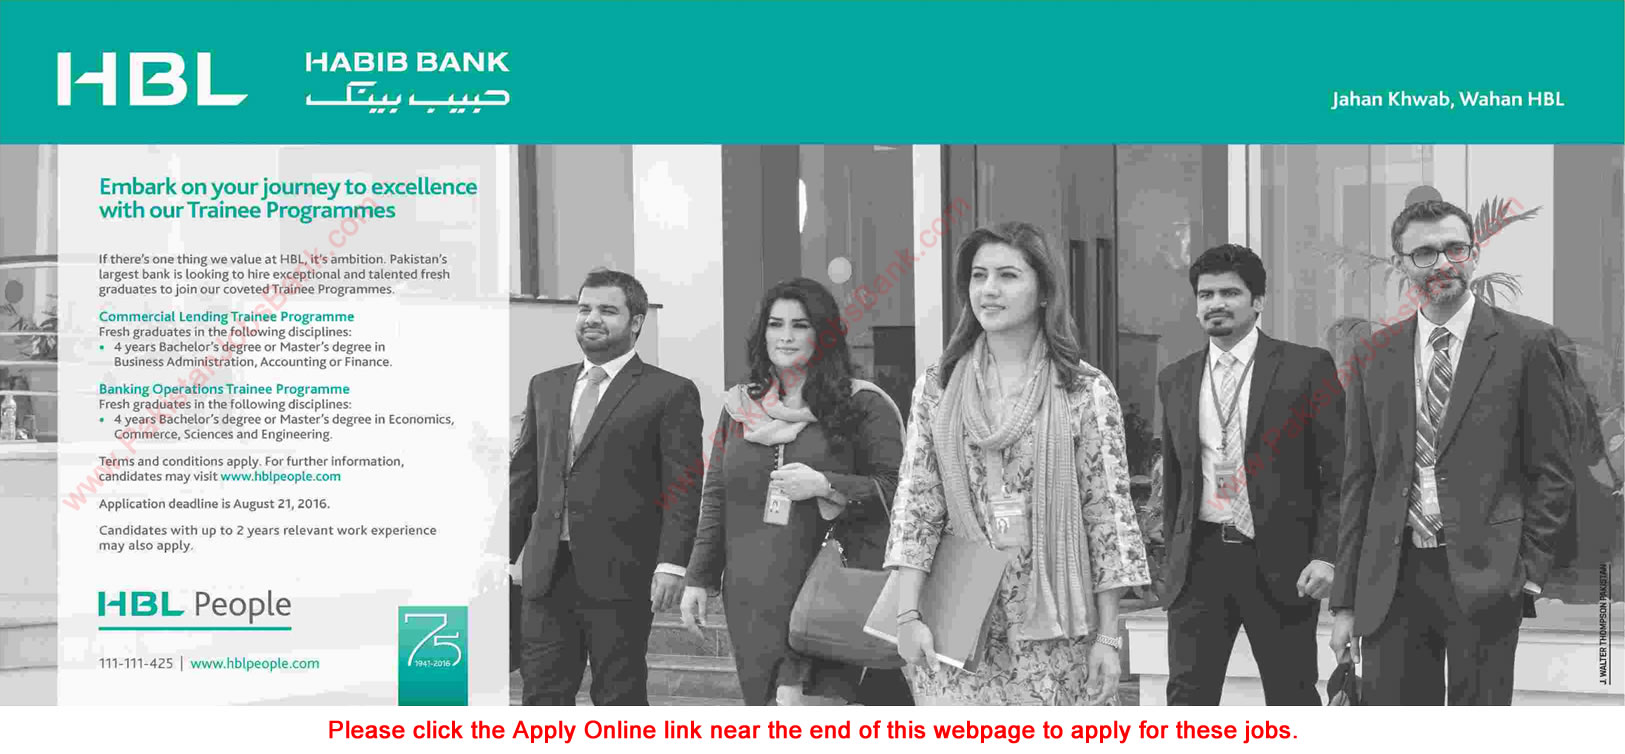 HBL Trainee Program August 2016 Apply Online Commercial Leading & Banking Operations Jobs Latest